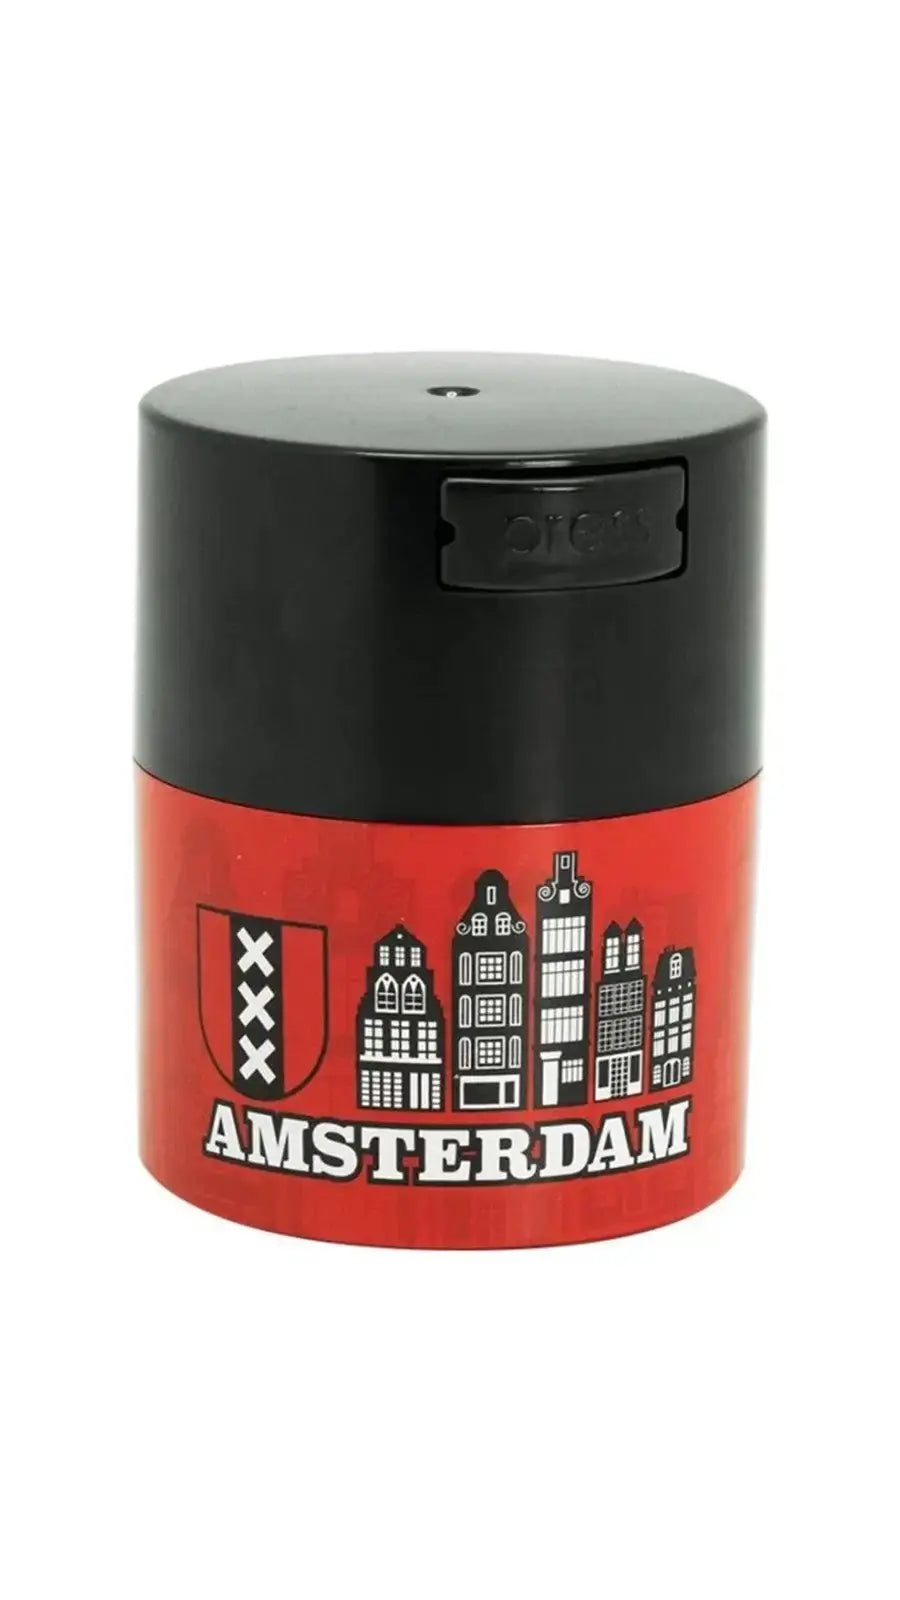 Minivac 0,12 liter / 40g / Solid / Amsterdam - TightVac Europe - The eassiest storage solutions